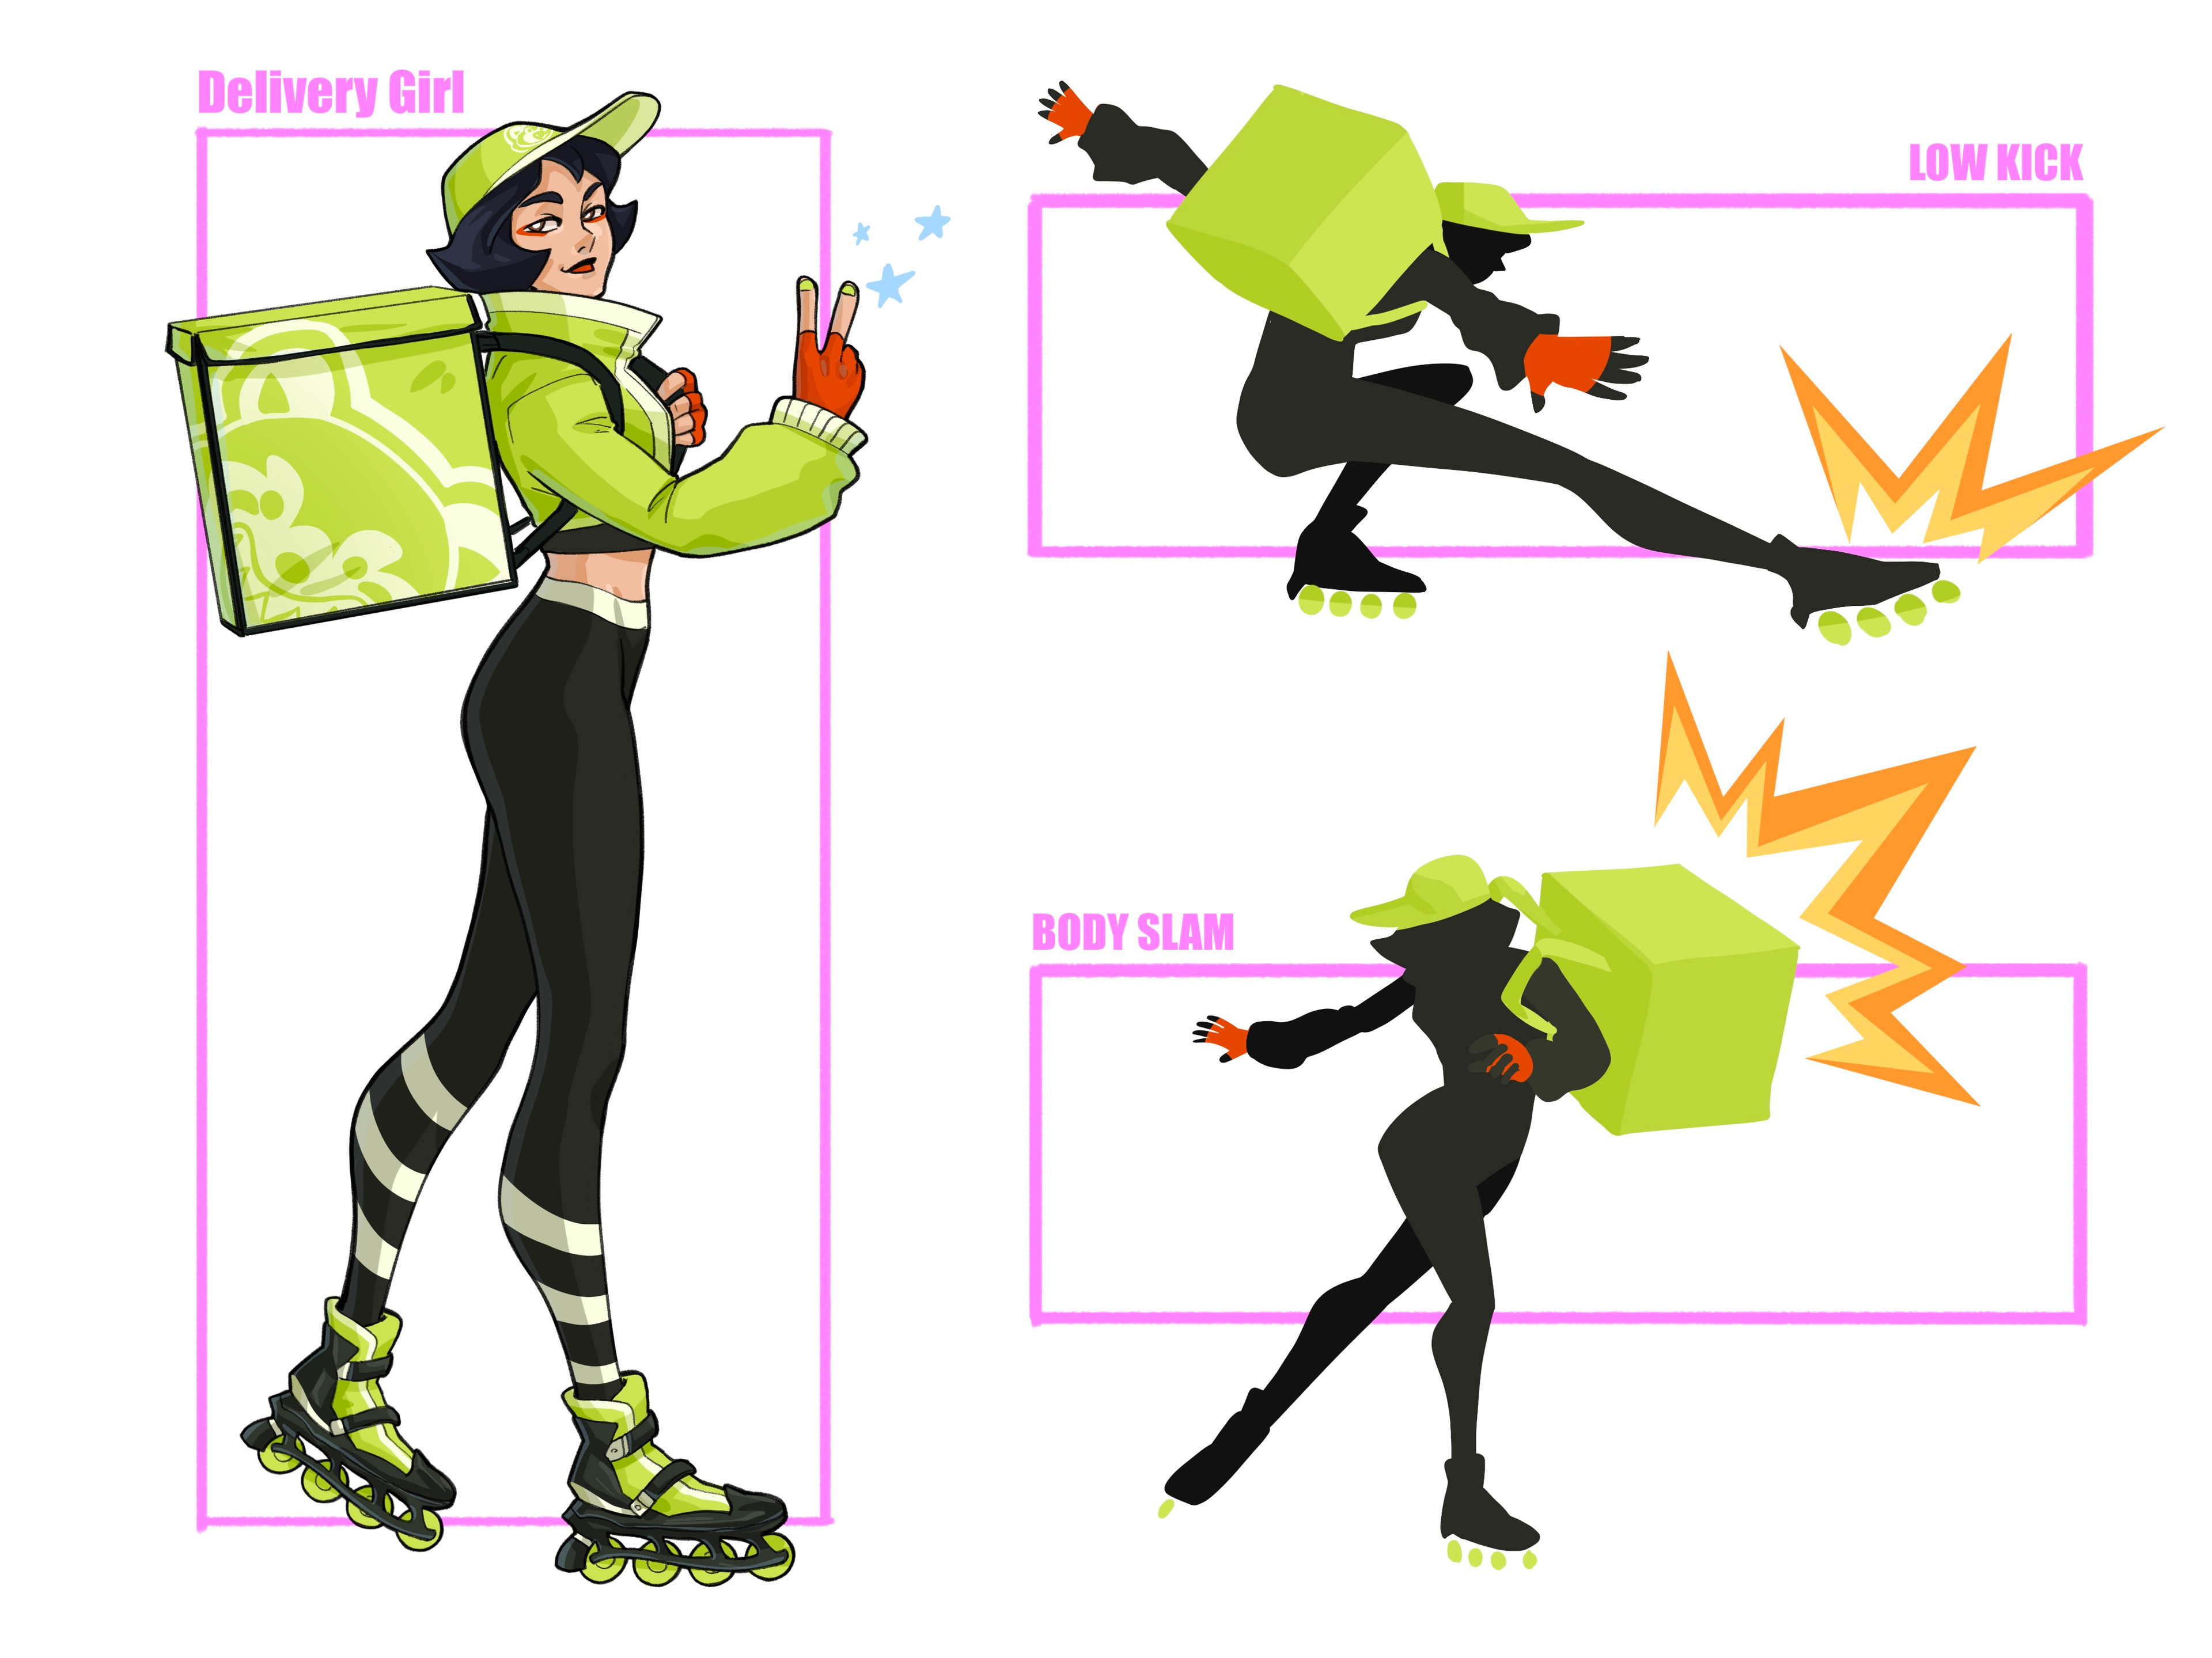 Delivery girl for a fighter game, working for the Green Panda delivery app.